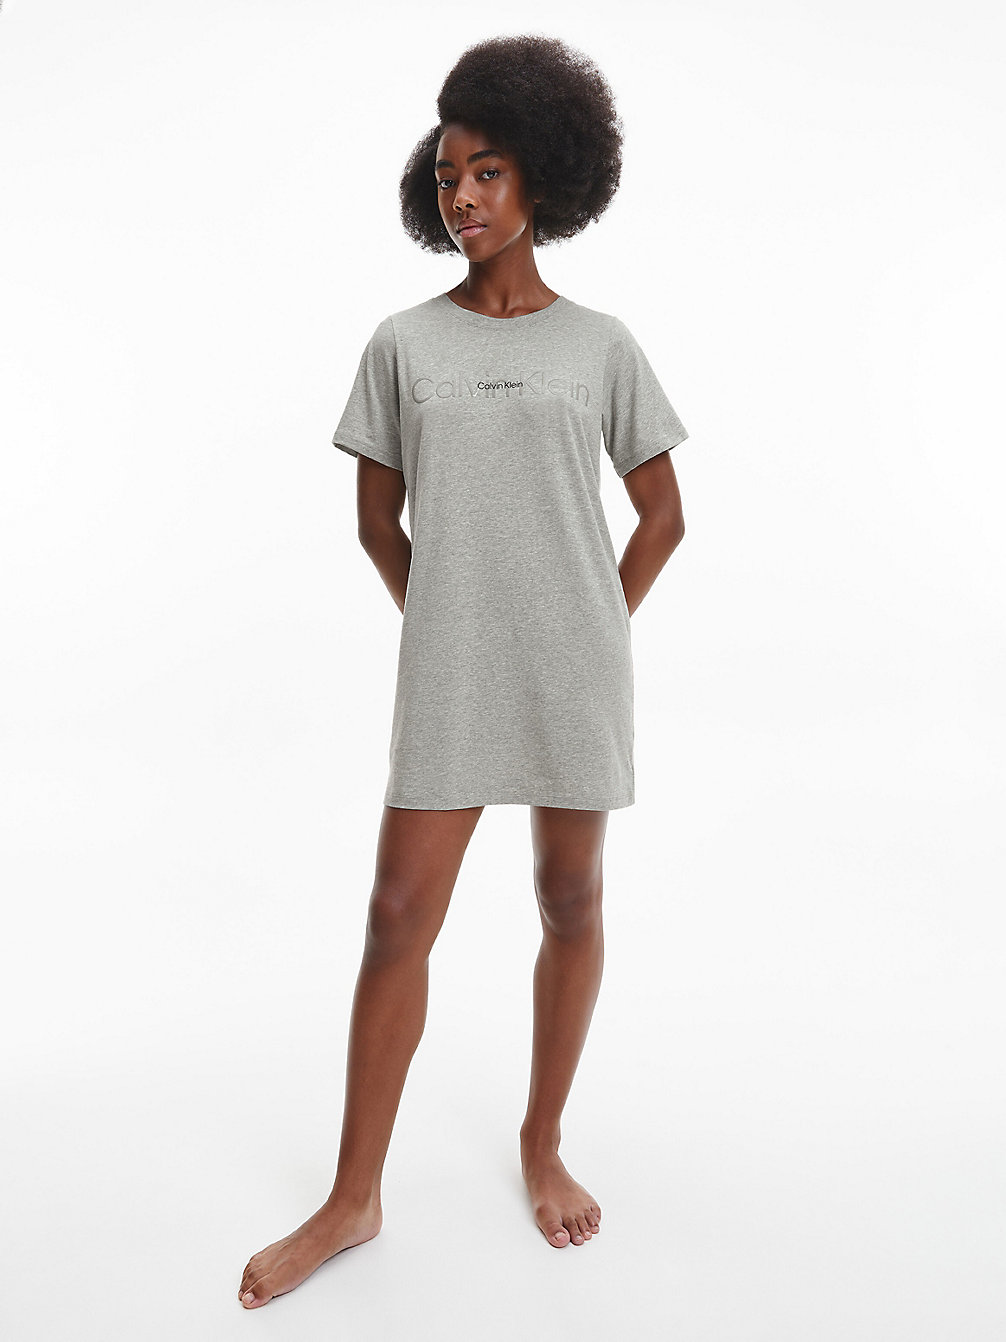 Camisón - Embossed Icon > GREY HEATHER > undefined mujer > Calvin Klein